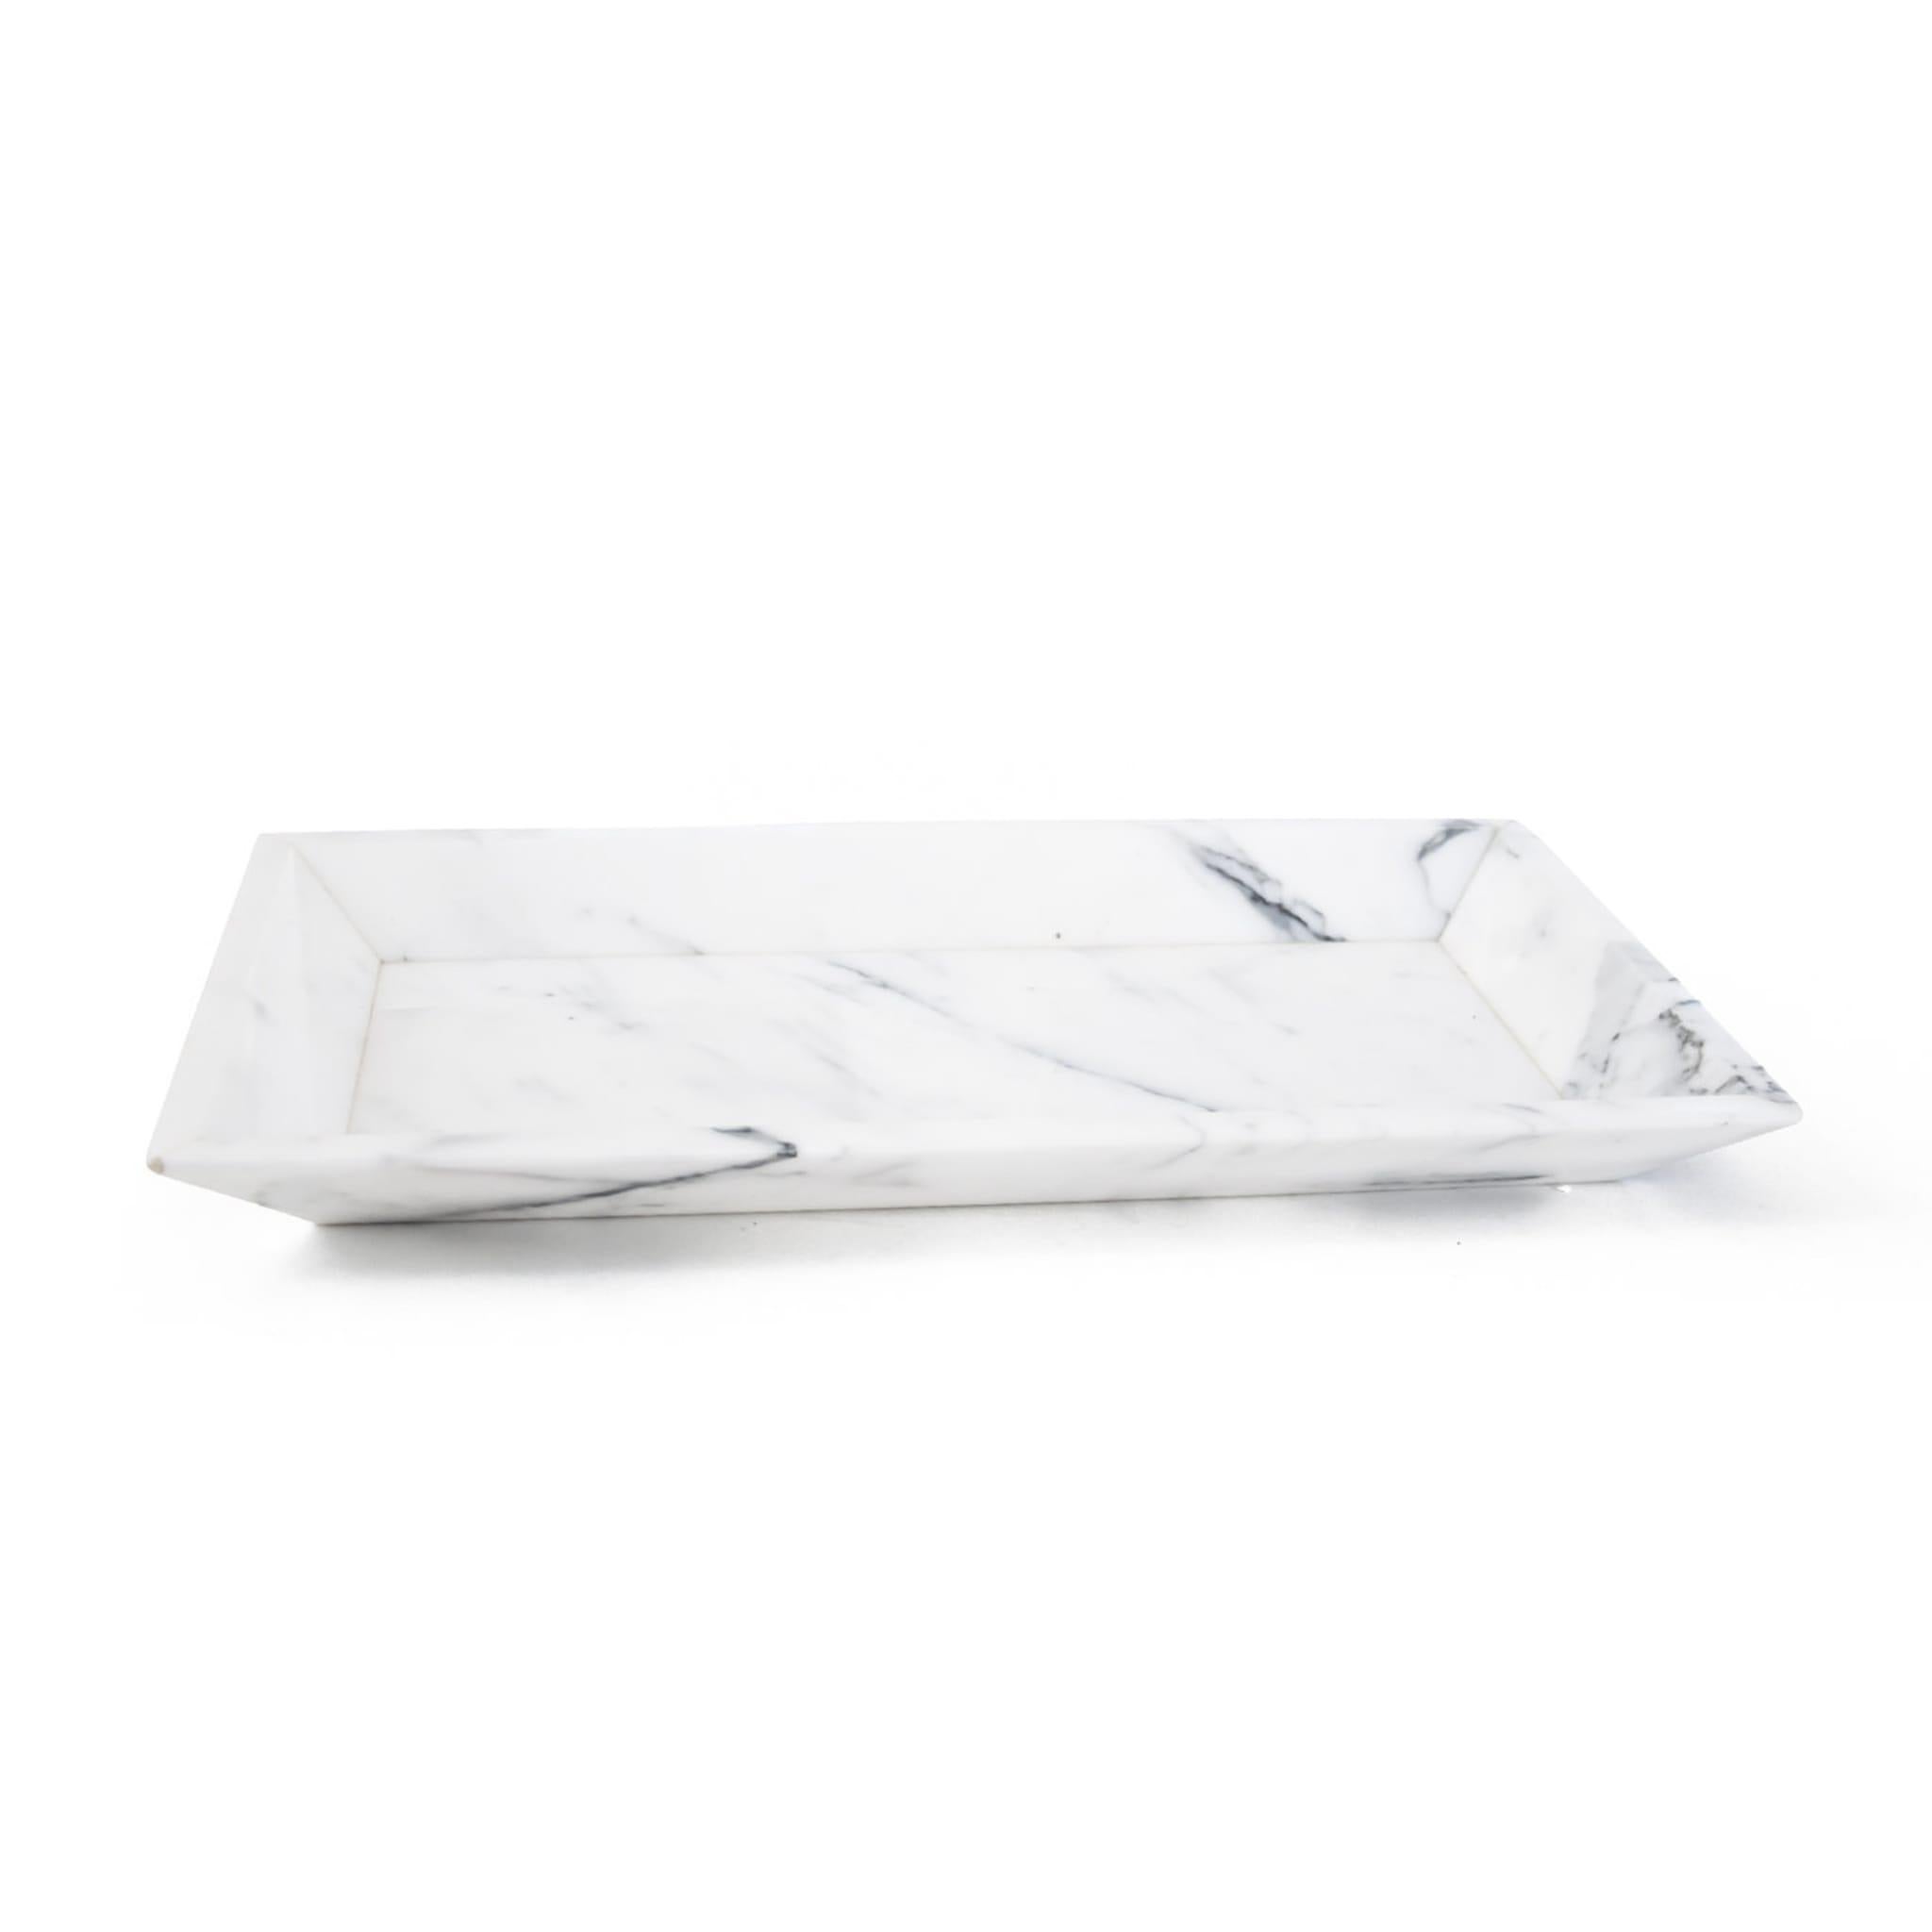 Merging functionality and superb aesthetics, this rectangular tray in Carrara marble is an unmissable tableware item that strikes with its simple design. The characteristic gray veining gracing its surface is its unique and more precious decoration,